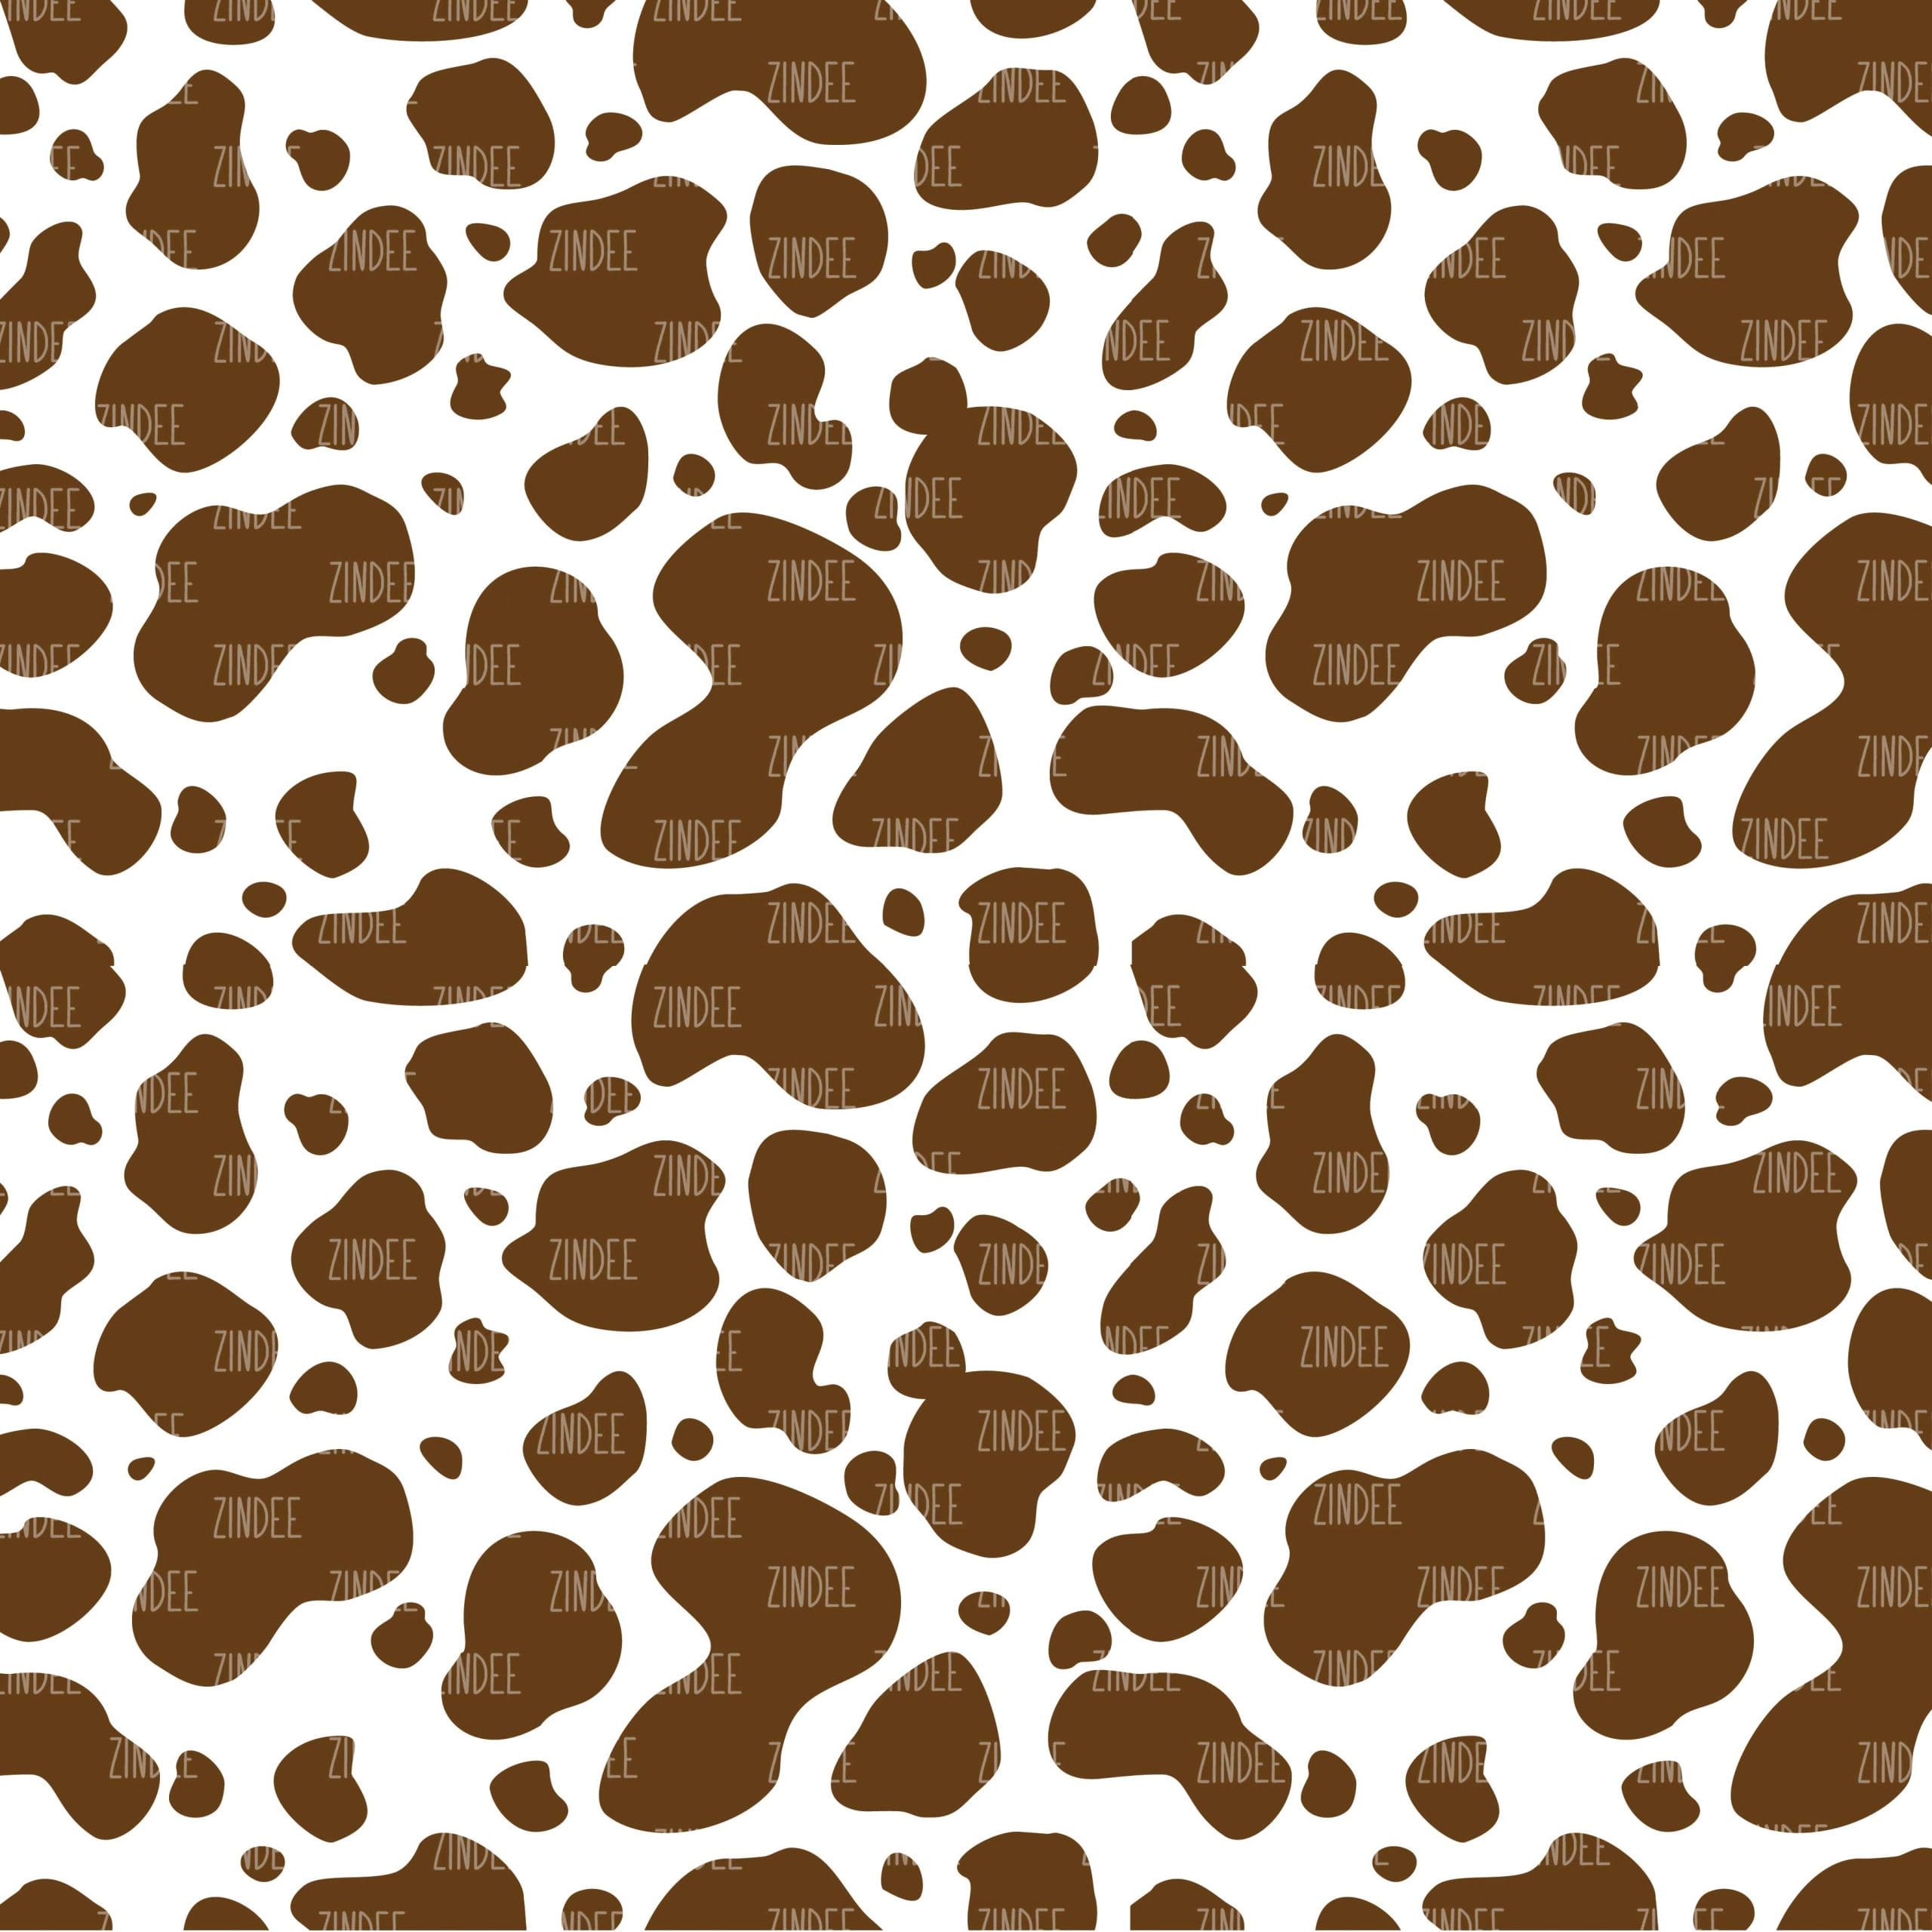 https://zindee.com/wp-content/uploads/2023/10/brown-cow-print-pp-1-scaled-1.jpg